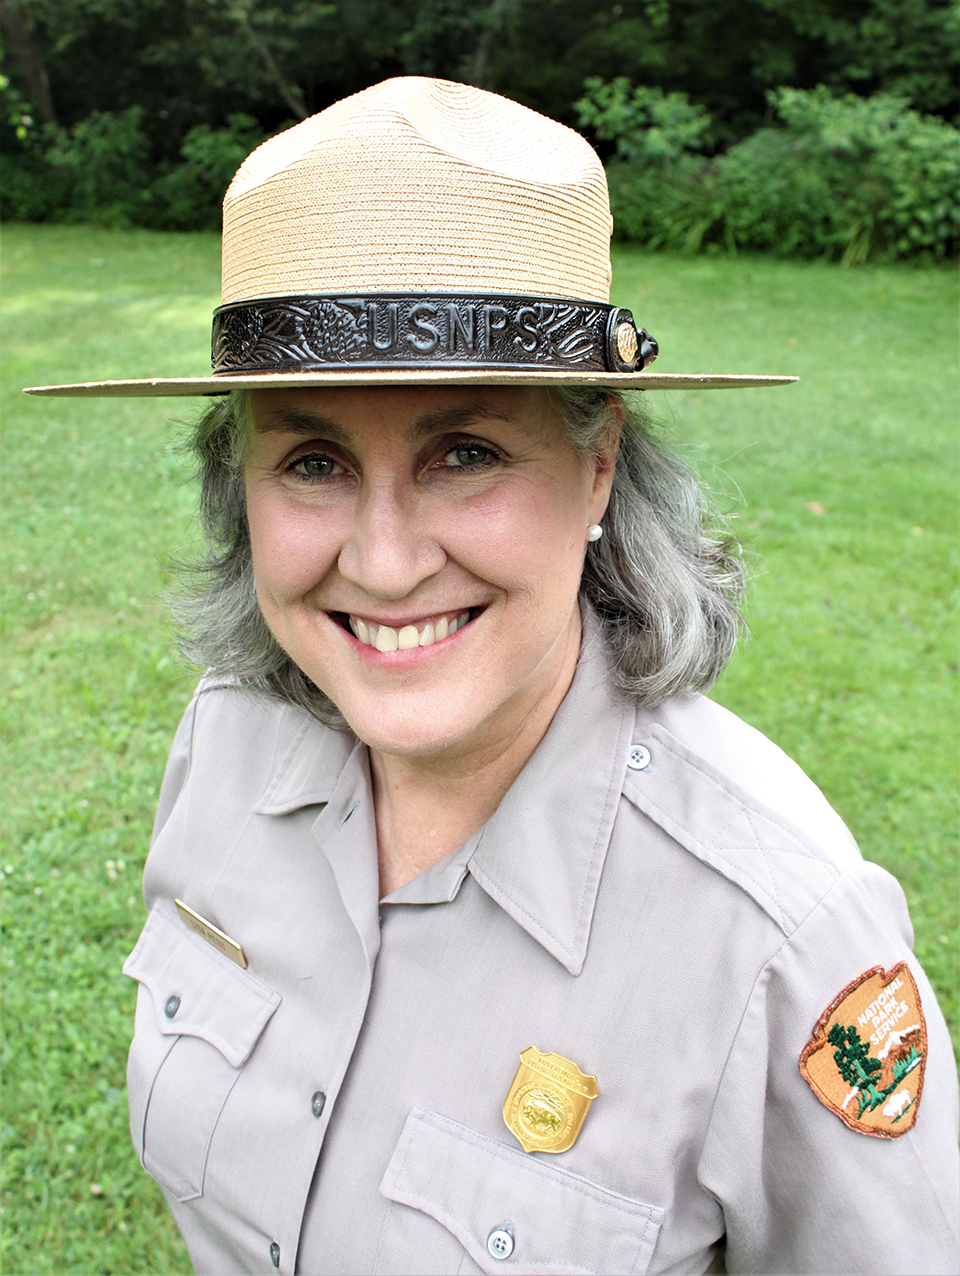 Portrait of a smiling uniformed ranger with shoulder-length dark gray hair; she wears a tan straw uniform hat and gray shirt with gold badge and National Park Service arrowhead patch on the sleeve.